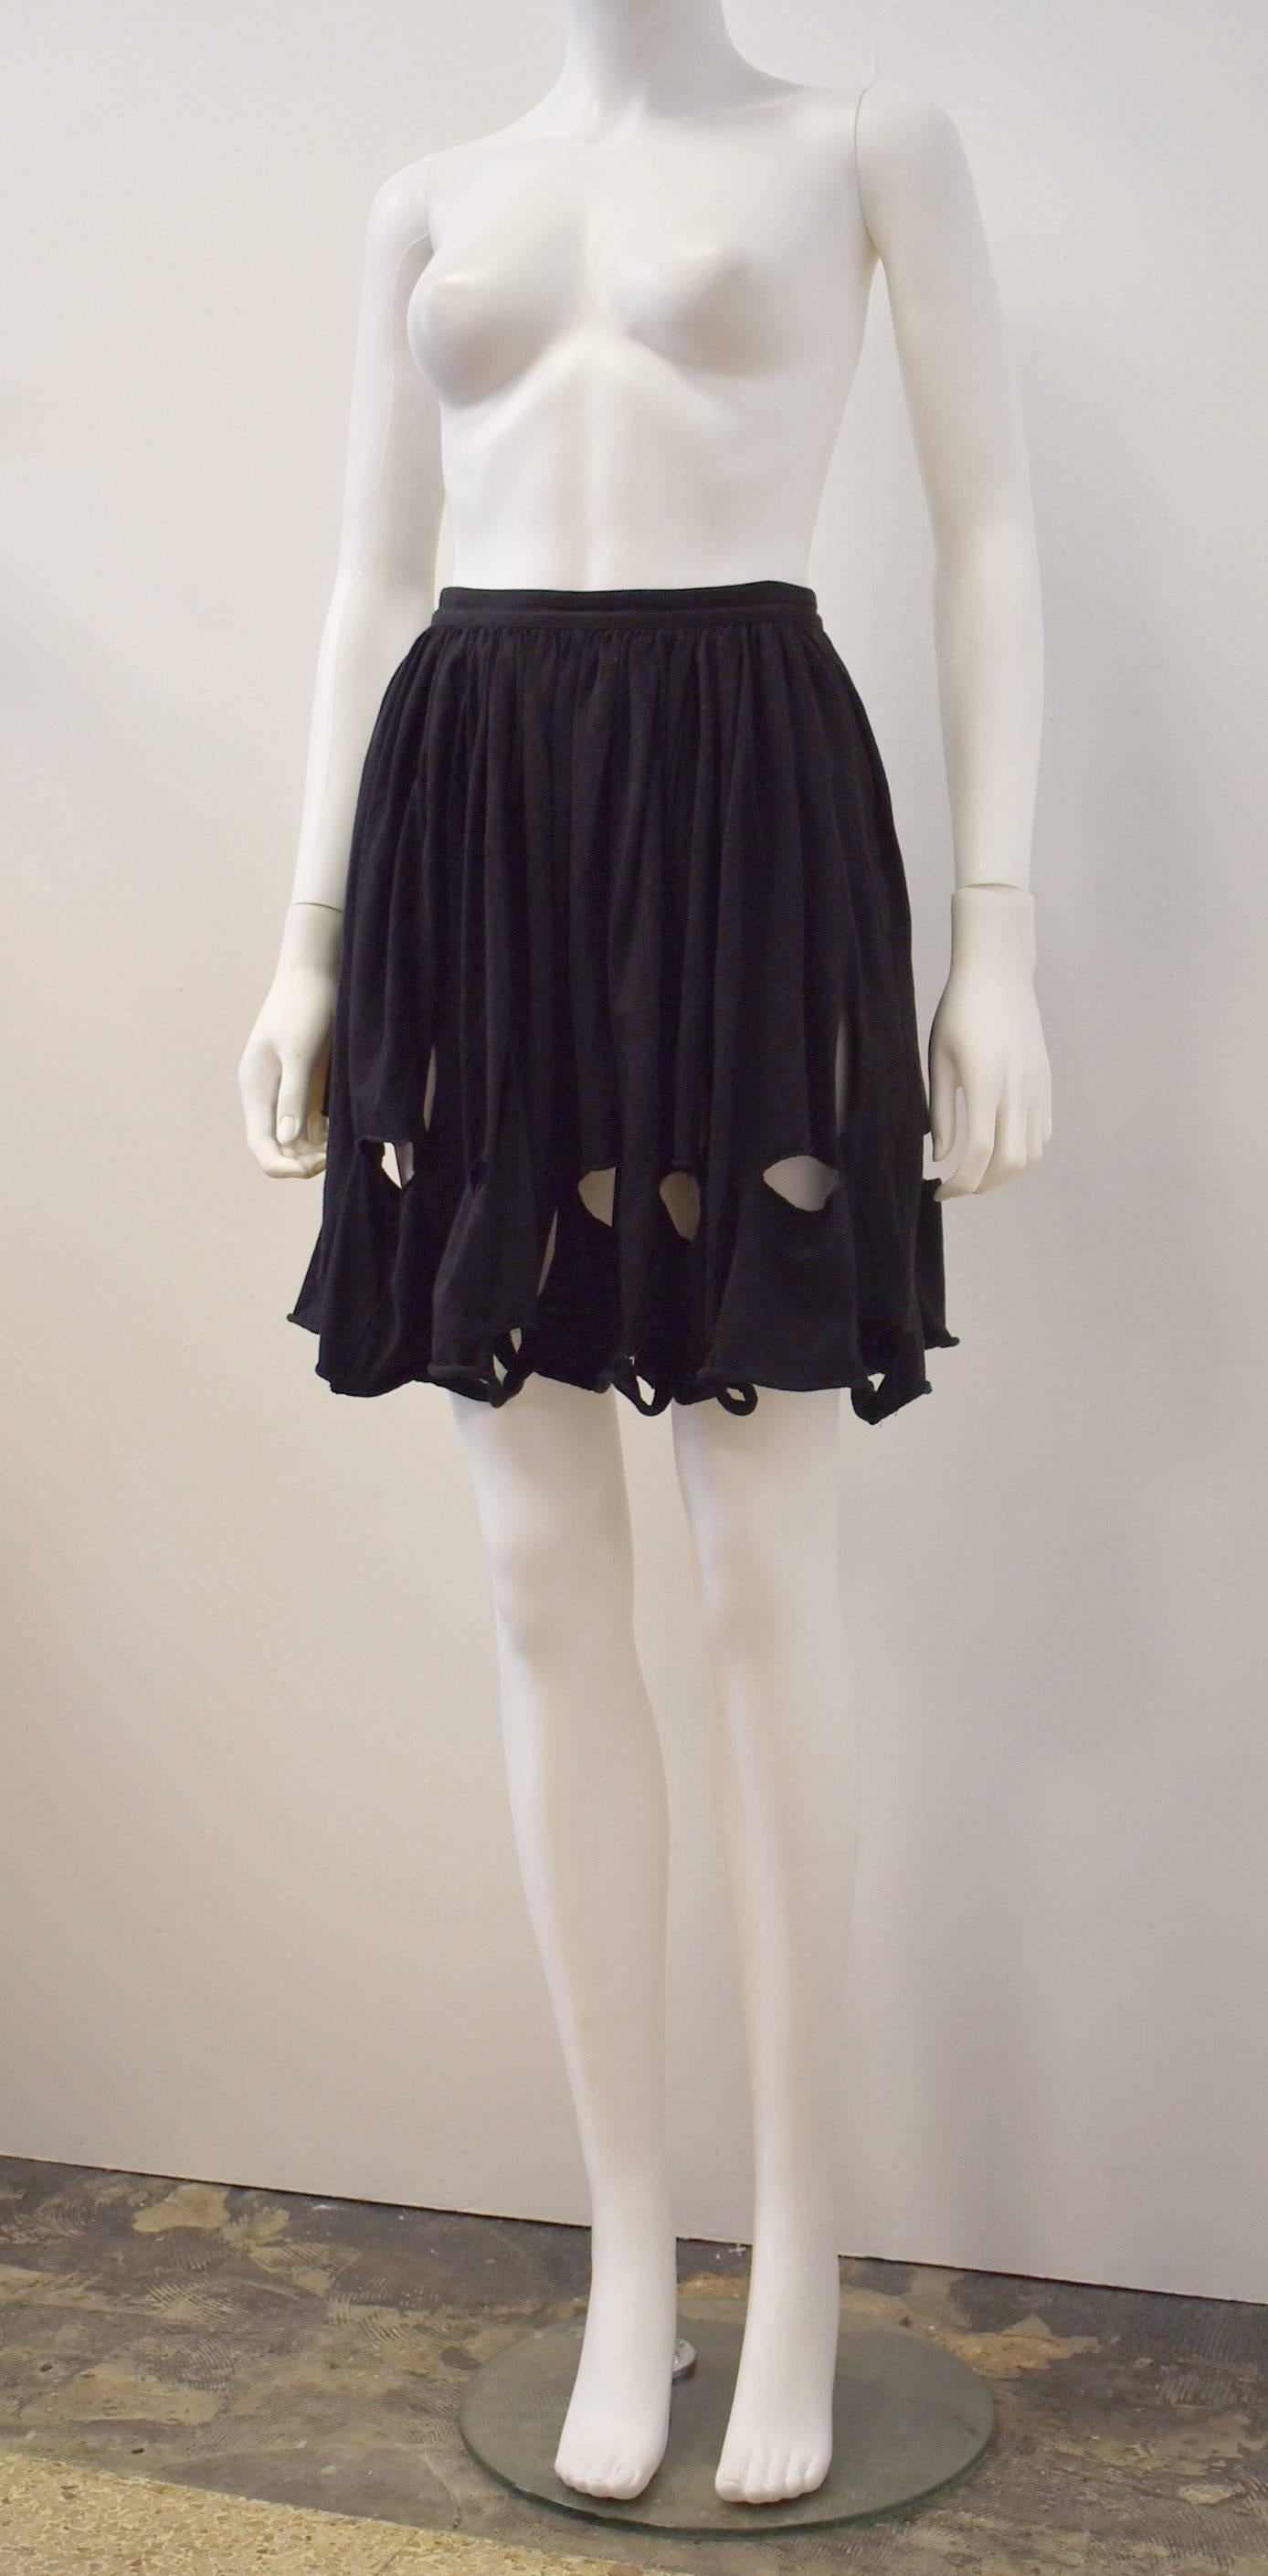 Comme des Garcons short black pleated/flared skirt with cut-out details along the hem. The holes are cut in an elliptical shape, both horizontally and vertically to create a ‘deconstructed’ aesthetic that is synonymous with the brand. The skirt is